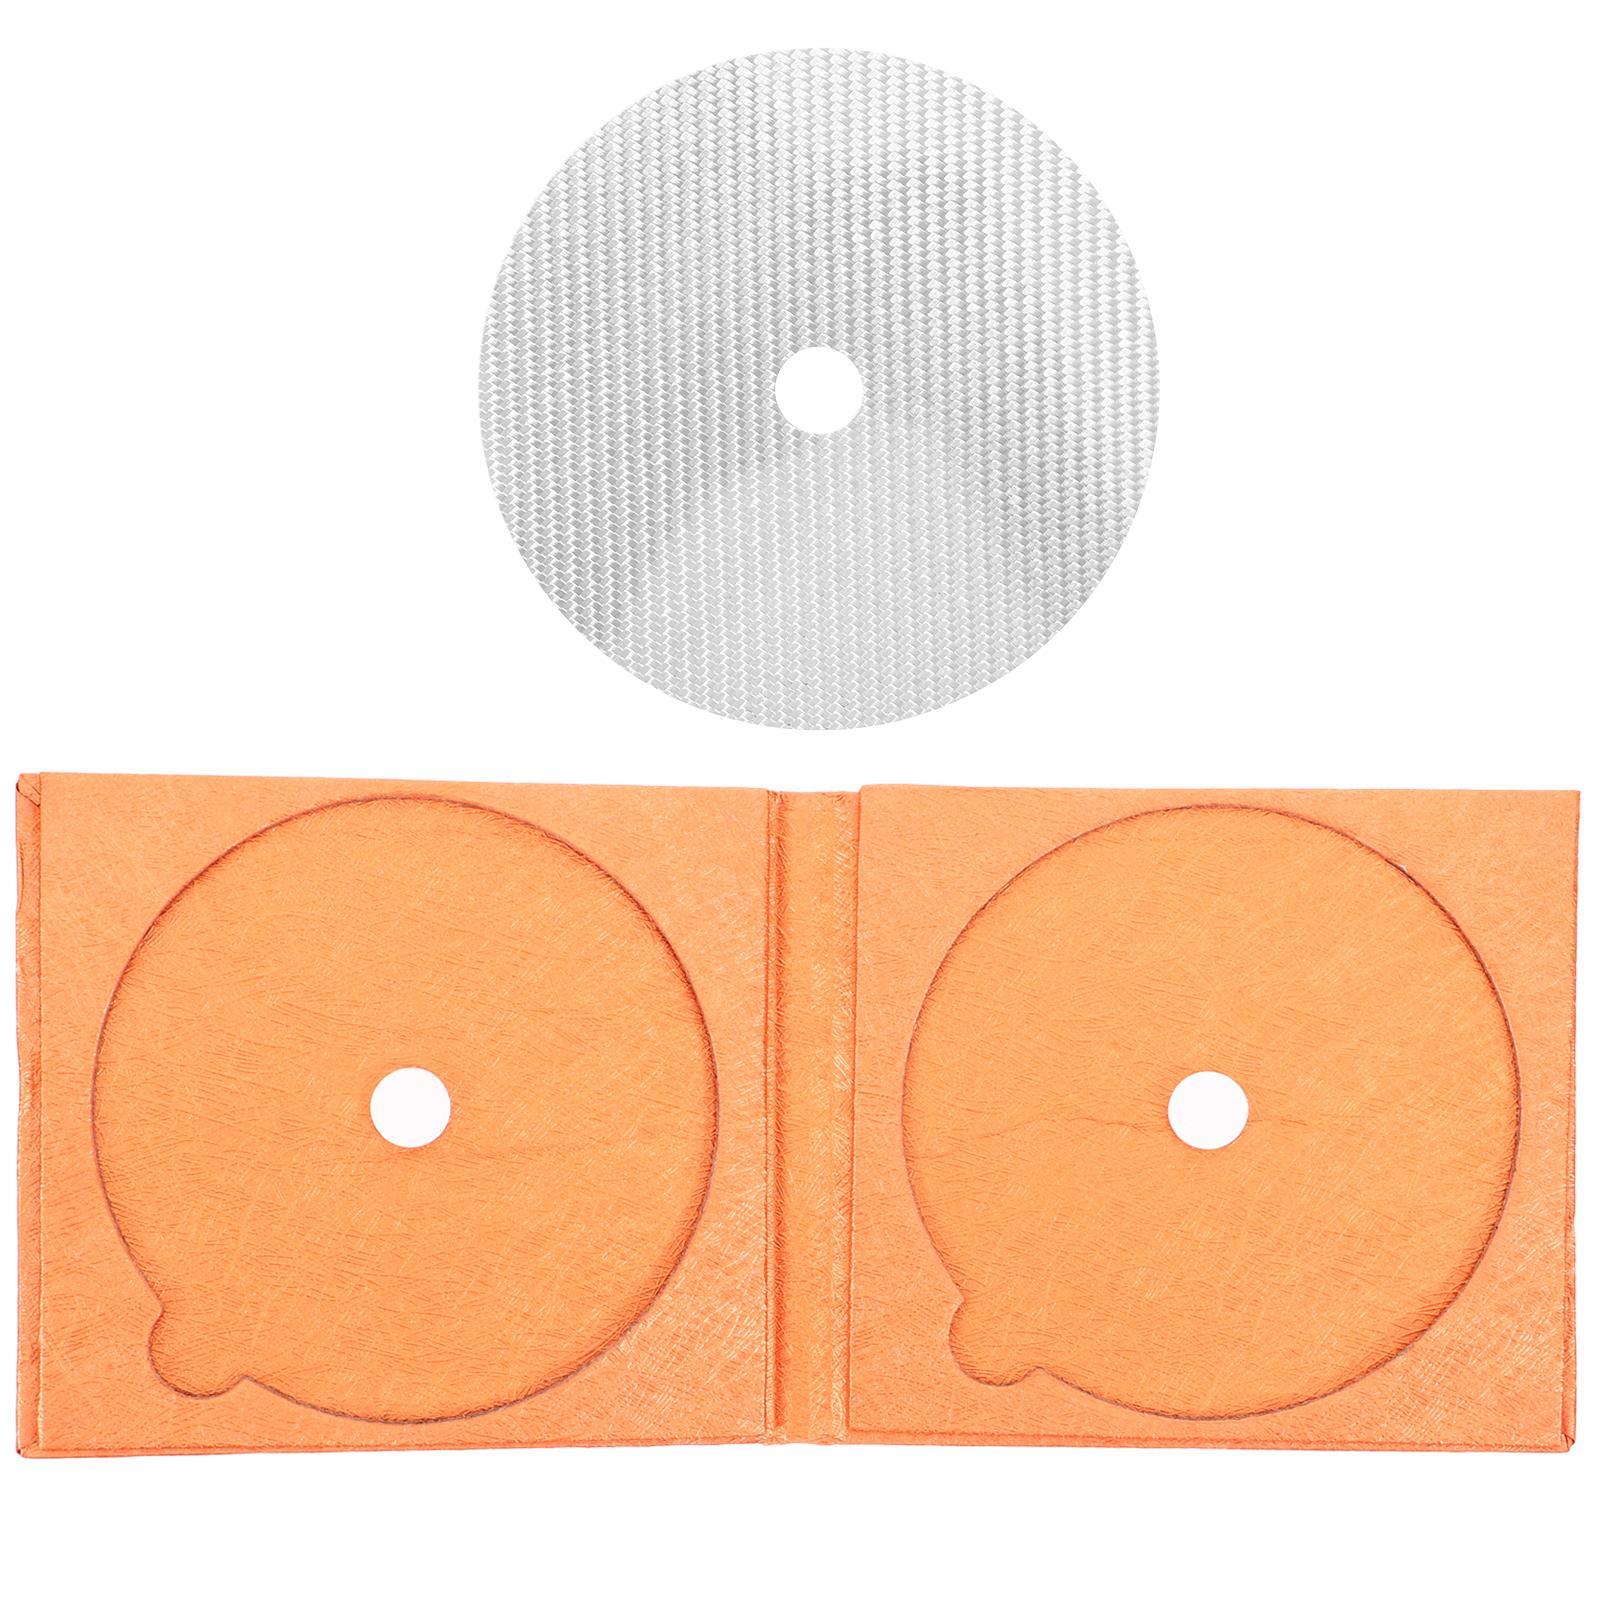 Stabilizer CD Player CD Tuning Pads Acrylic Turntable Mat Dvd CD Tuning Pad Disc Stabilizer Mat White